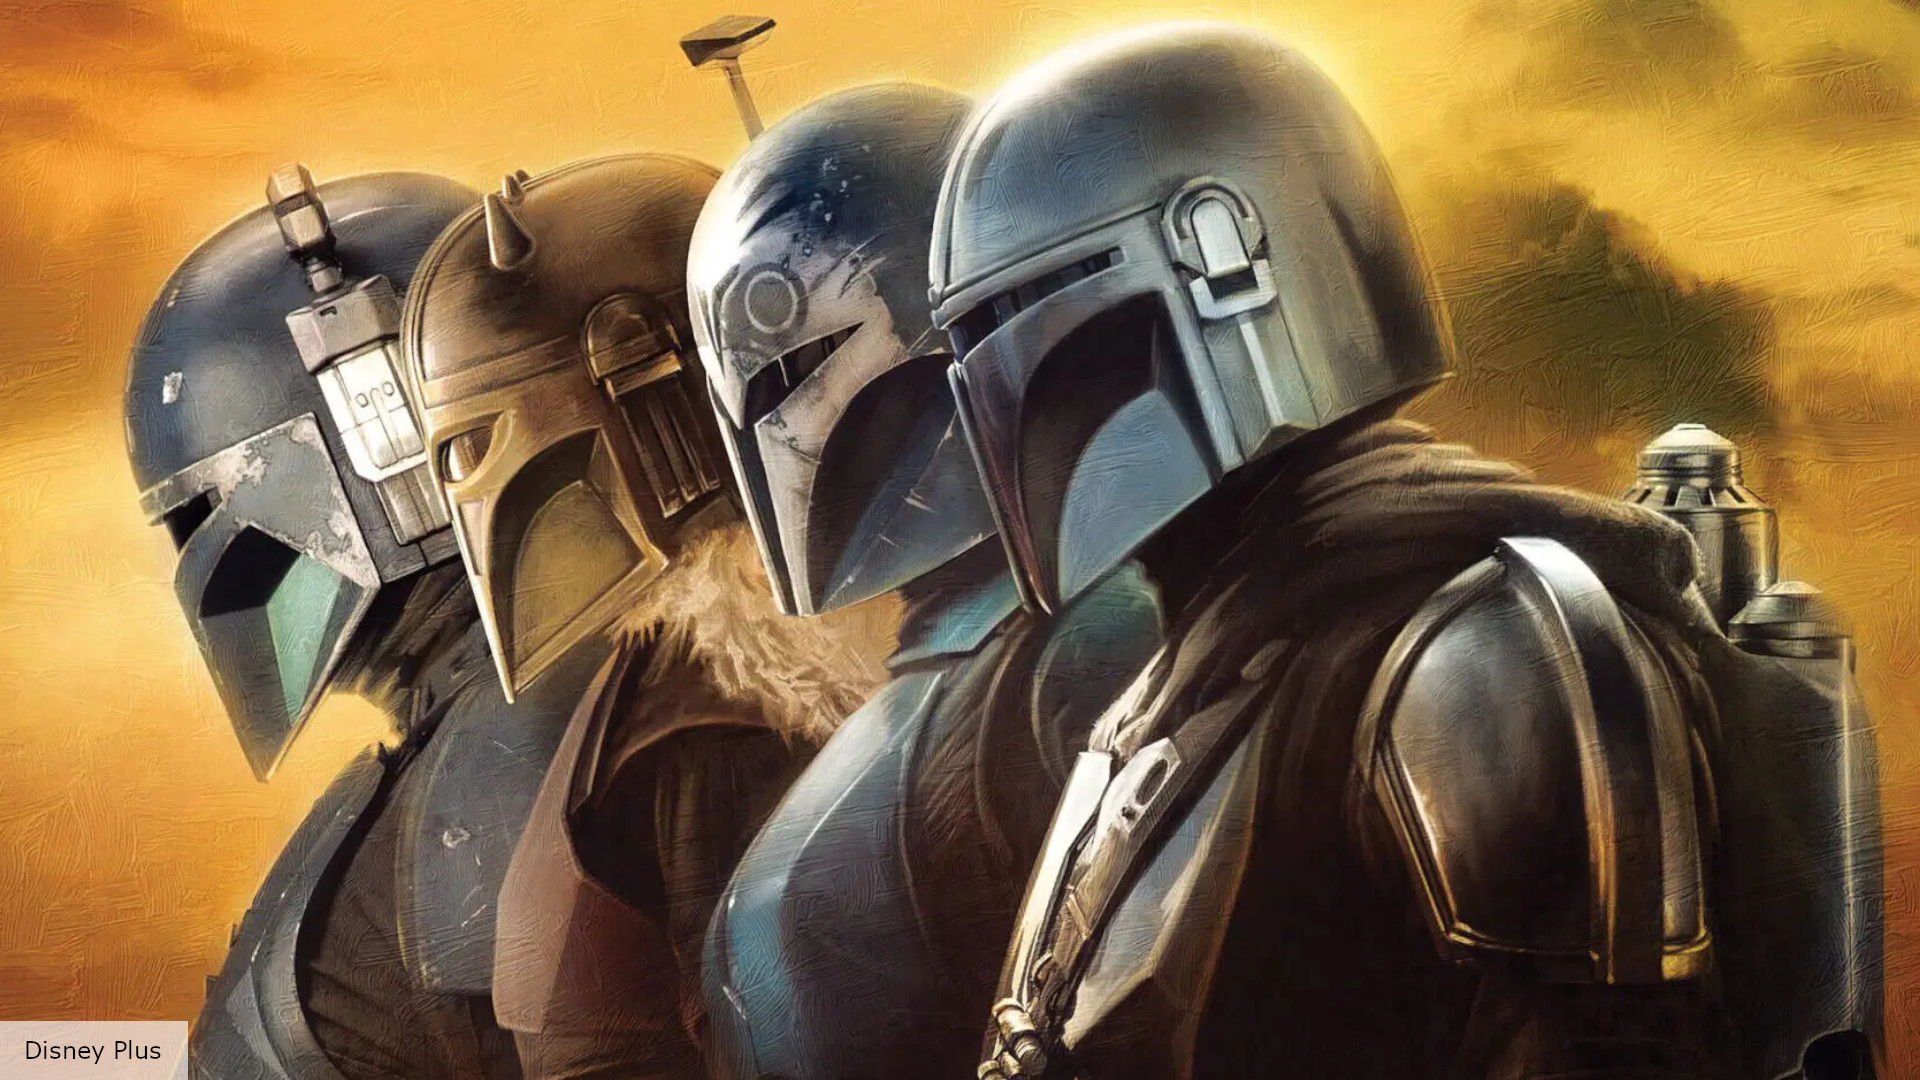 We expect numerous members of the recurring cast of The Mandalorian will return for the fourth season.